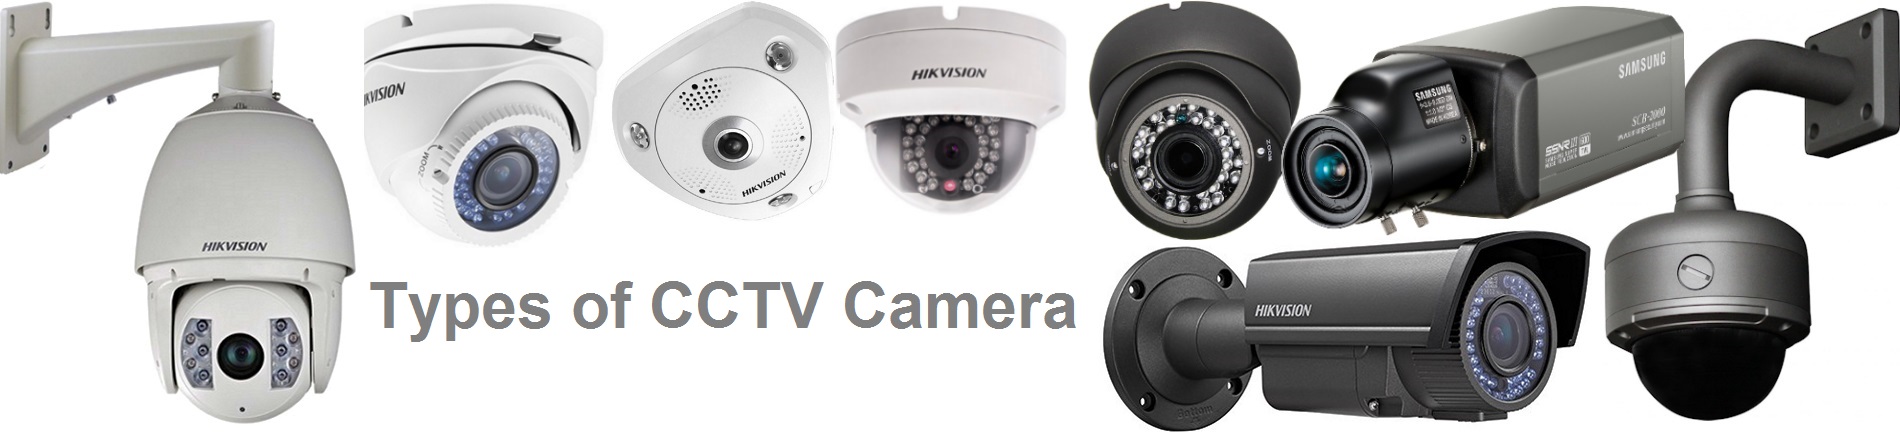 Different types of CCTV cameras